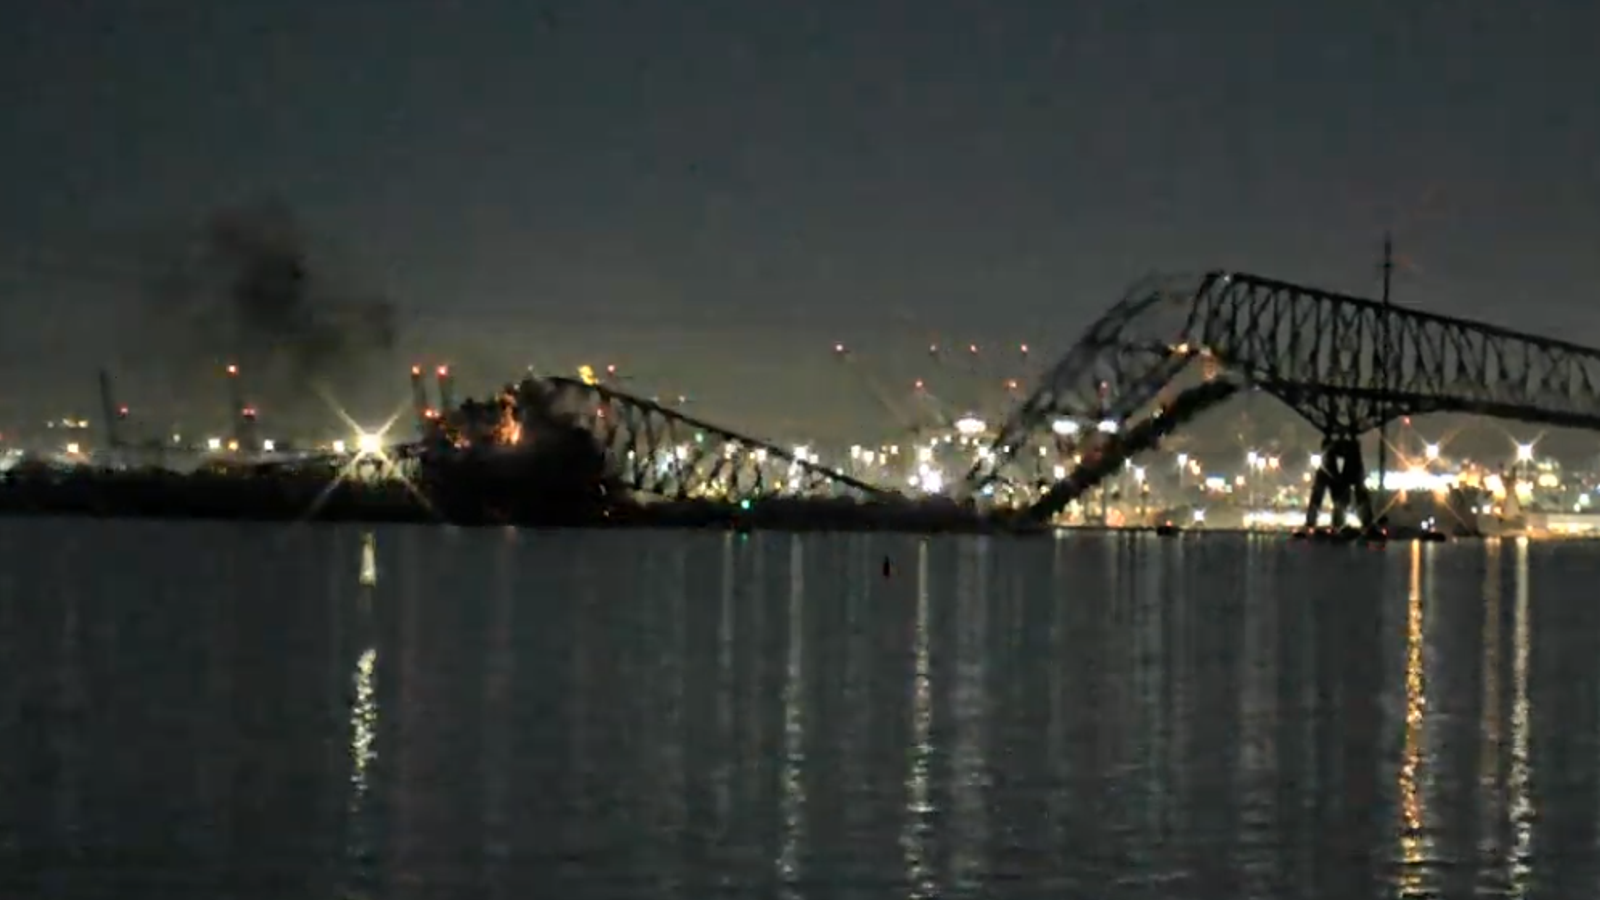 Bridge collapses in Baltimore after being hit by ship